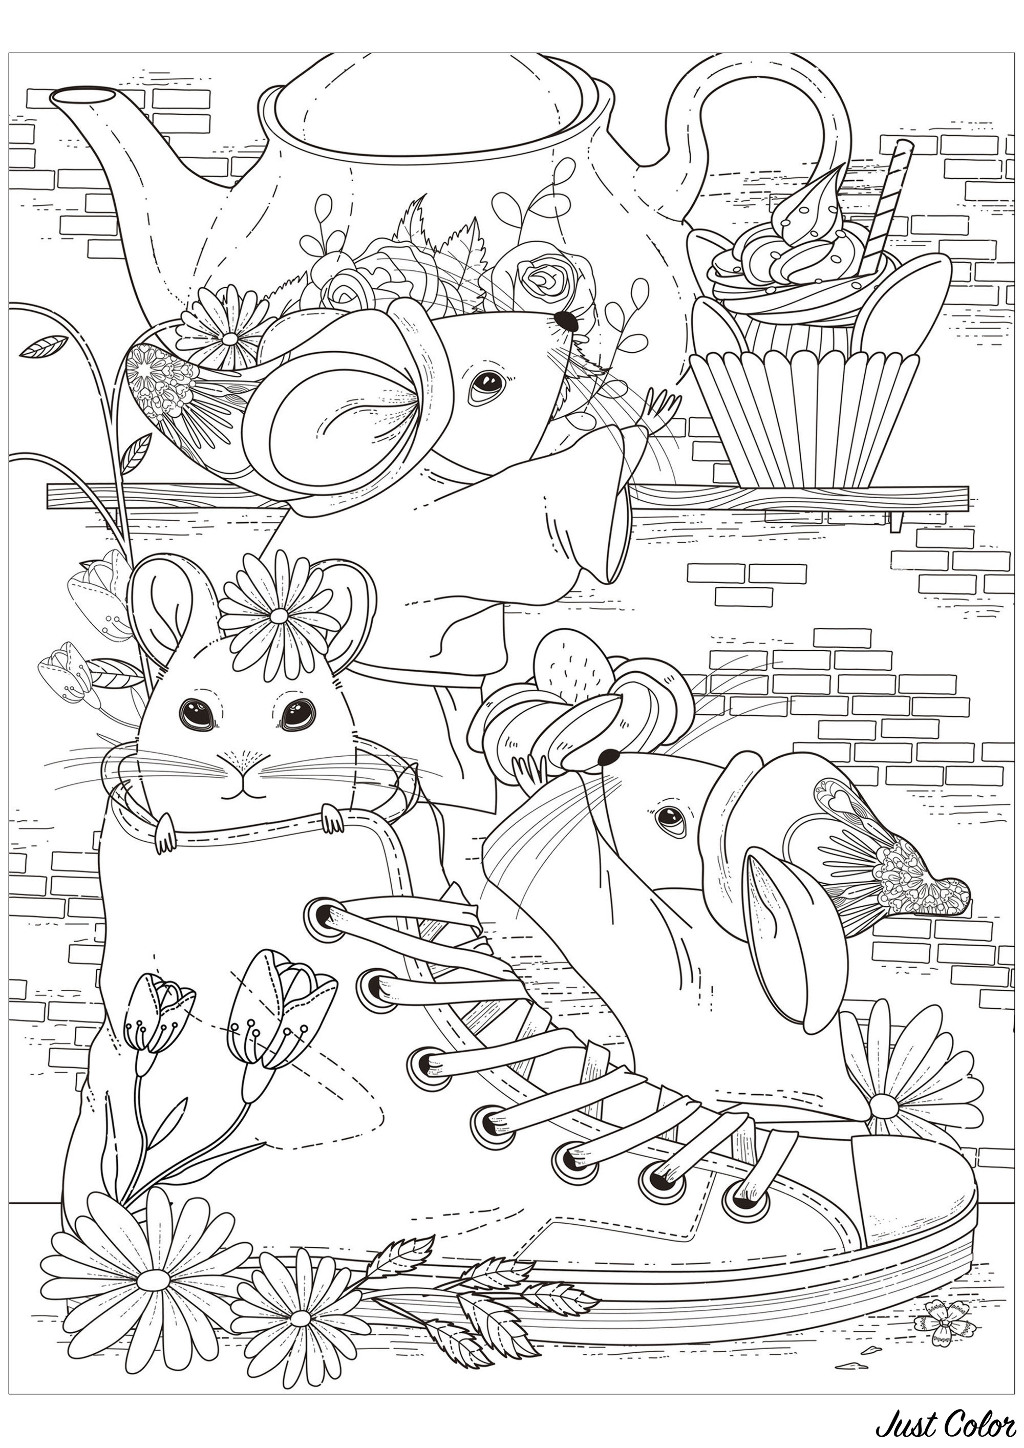 Coloring page of three mice having tea with one of them in a shoe